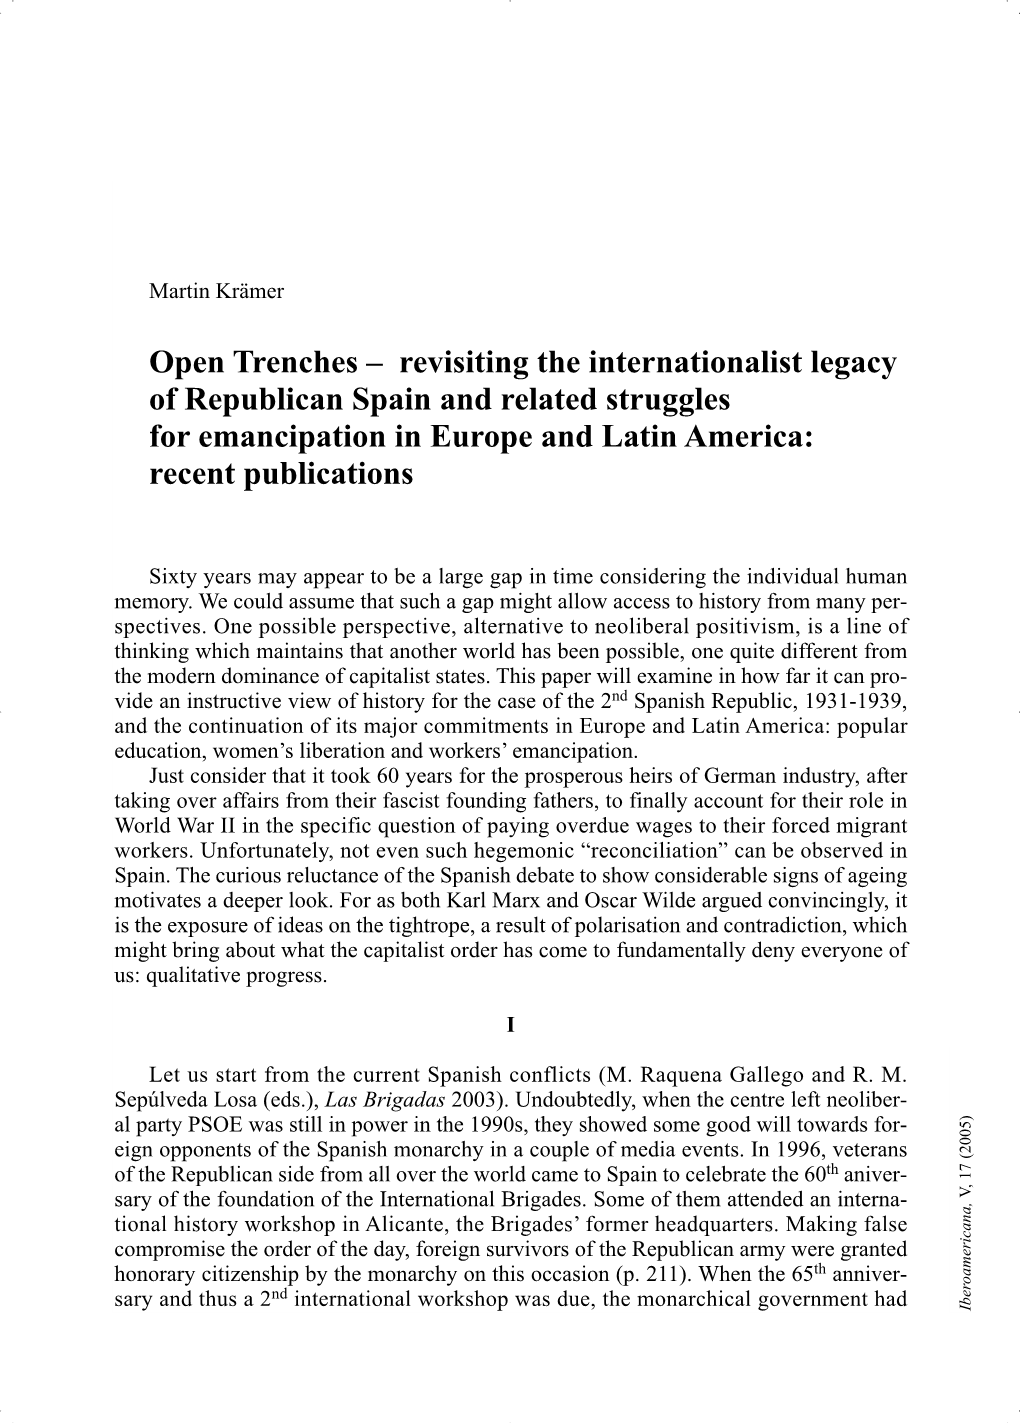 Open Trenches – Revisiting the Internationalist Legacy of Republican Spain and Related Struggles for Emancipation in Europe and Latin America: Recent Publications